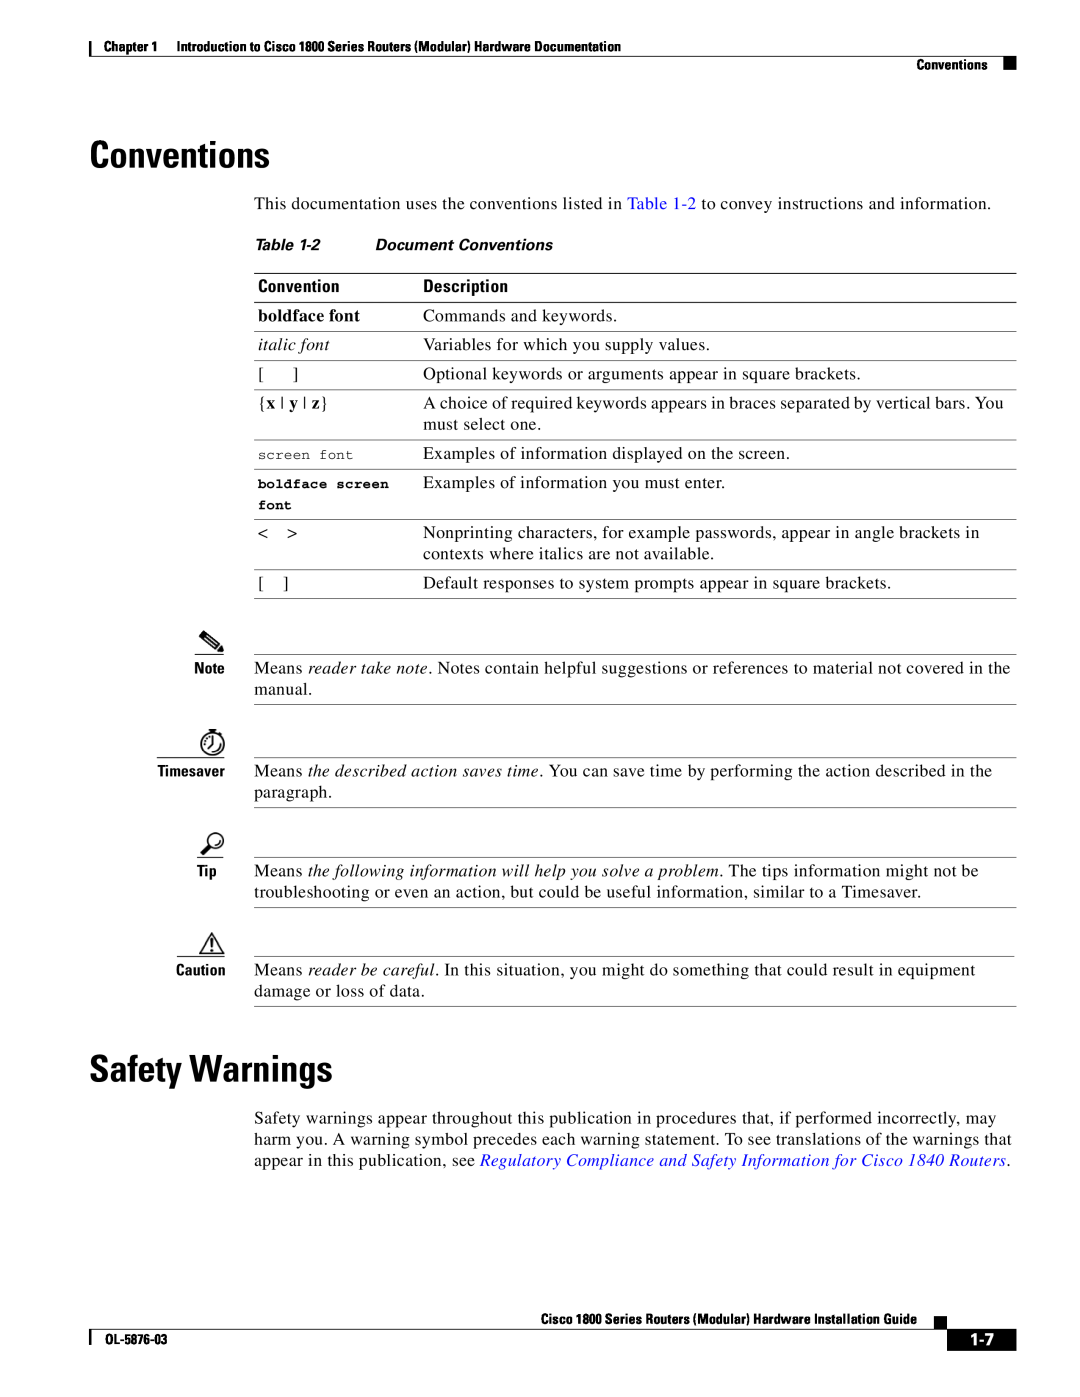 Cisco Systems CISCO1841-HSEC/K9-RF manual Conventions, Safety Warnings, boldface font, italic font 